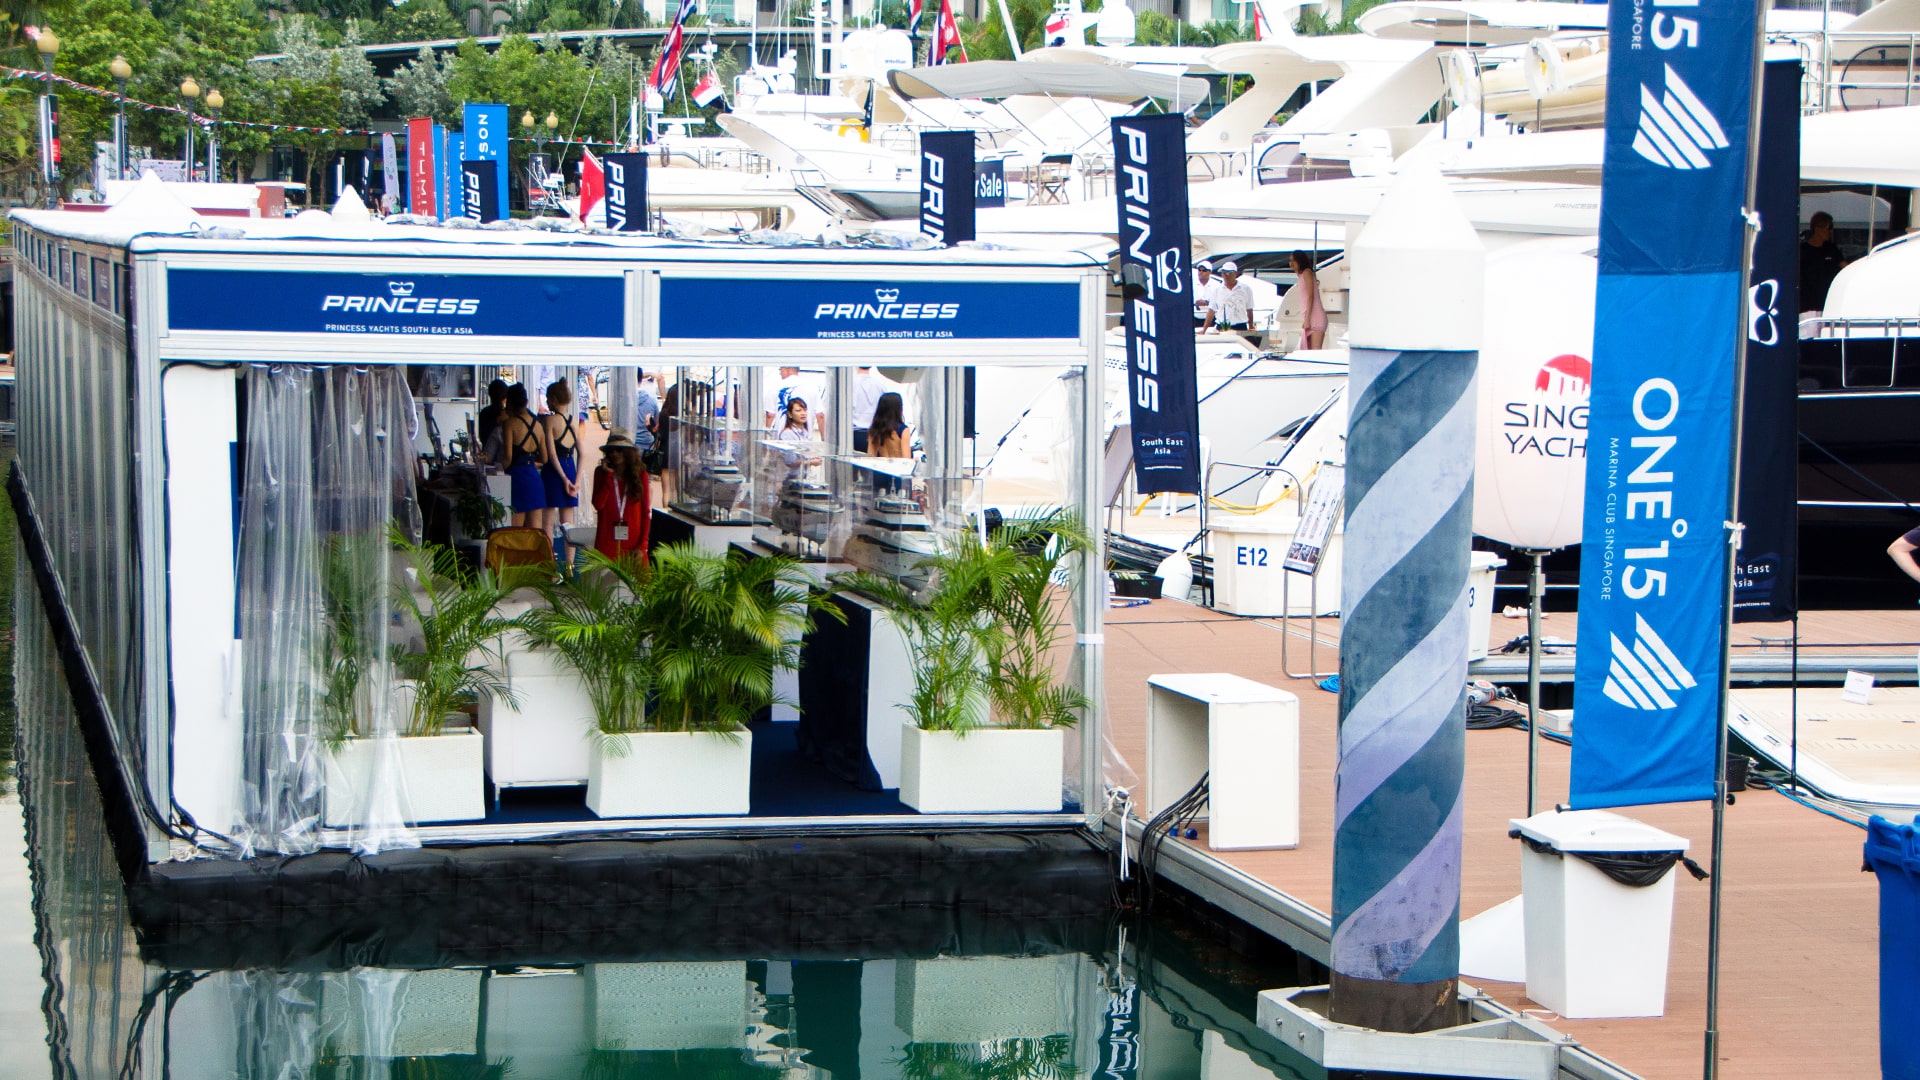 tsc_opt-images_tubelar-system_singapore-yacht-show-floating-showrooms-1920x1080-04-min